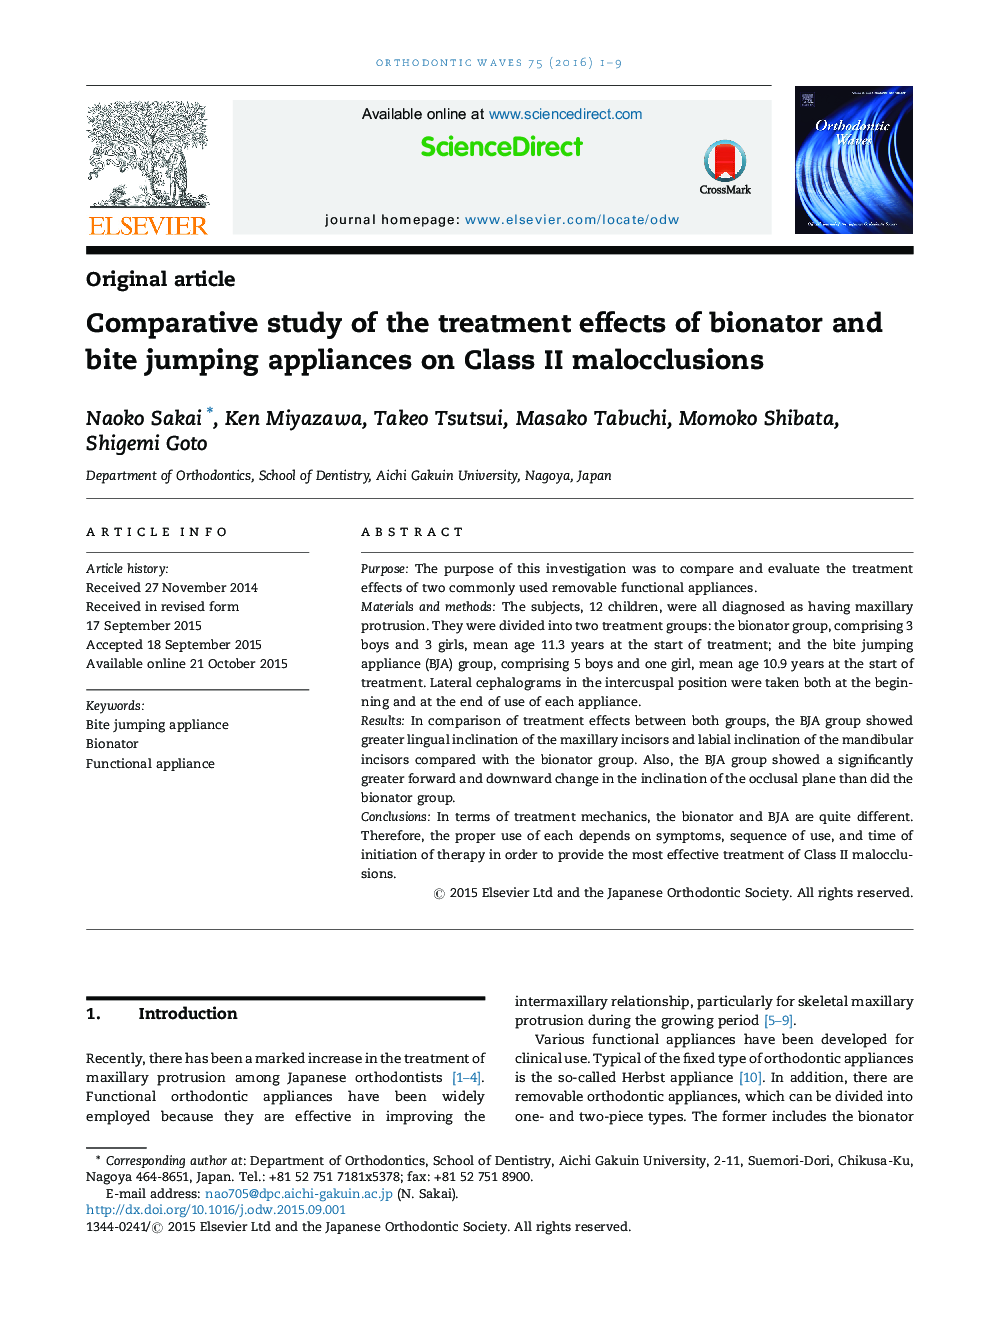 Comparative study of the treatment effects of bionator and bite jumping appliances on Class II malocclusions